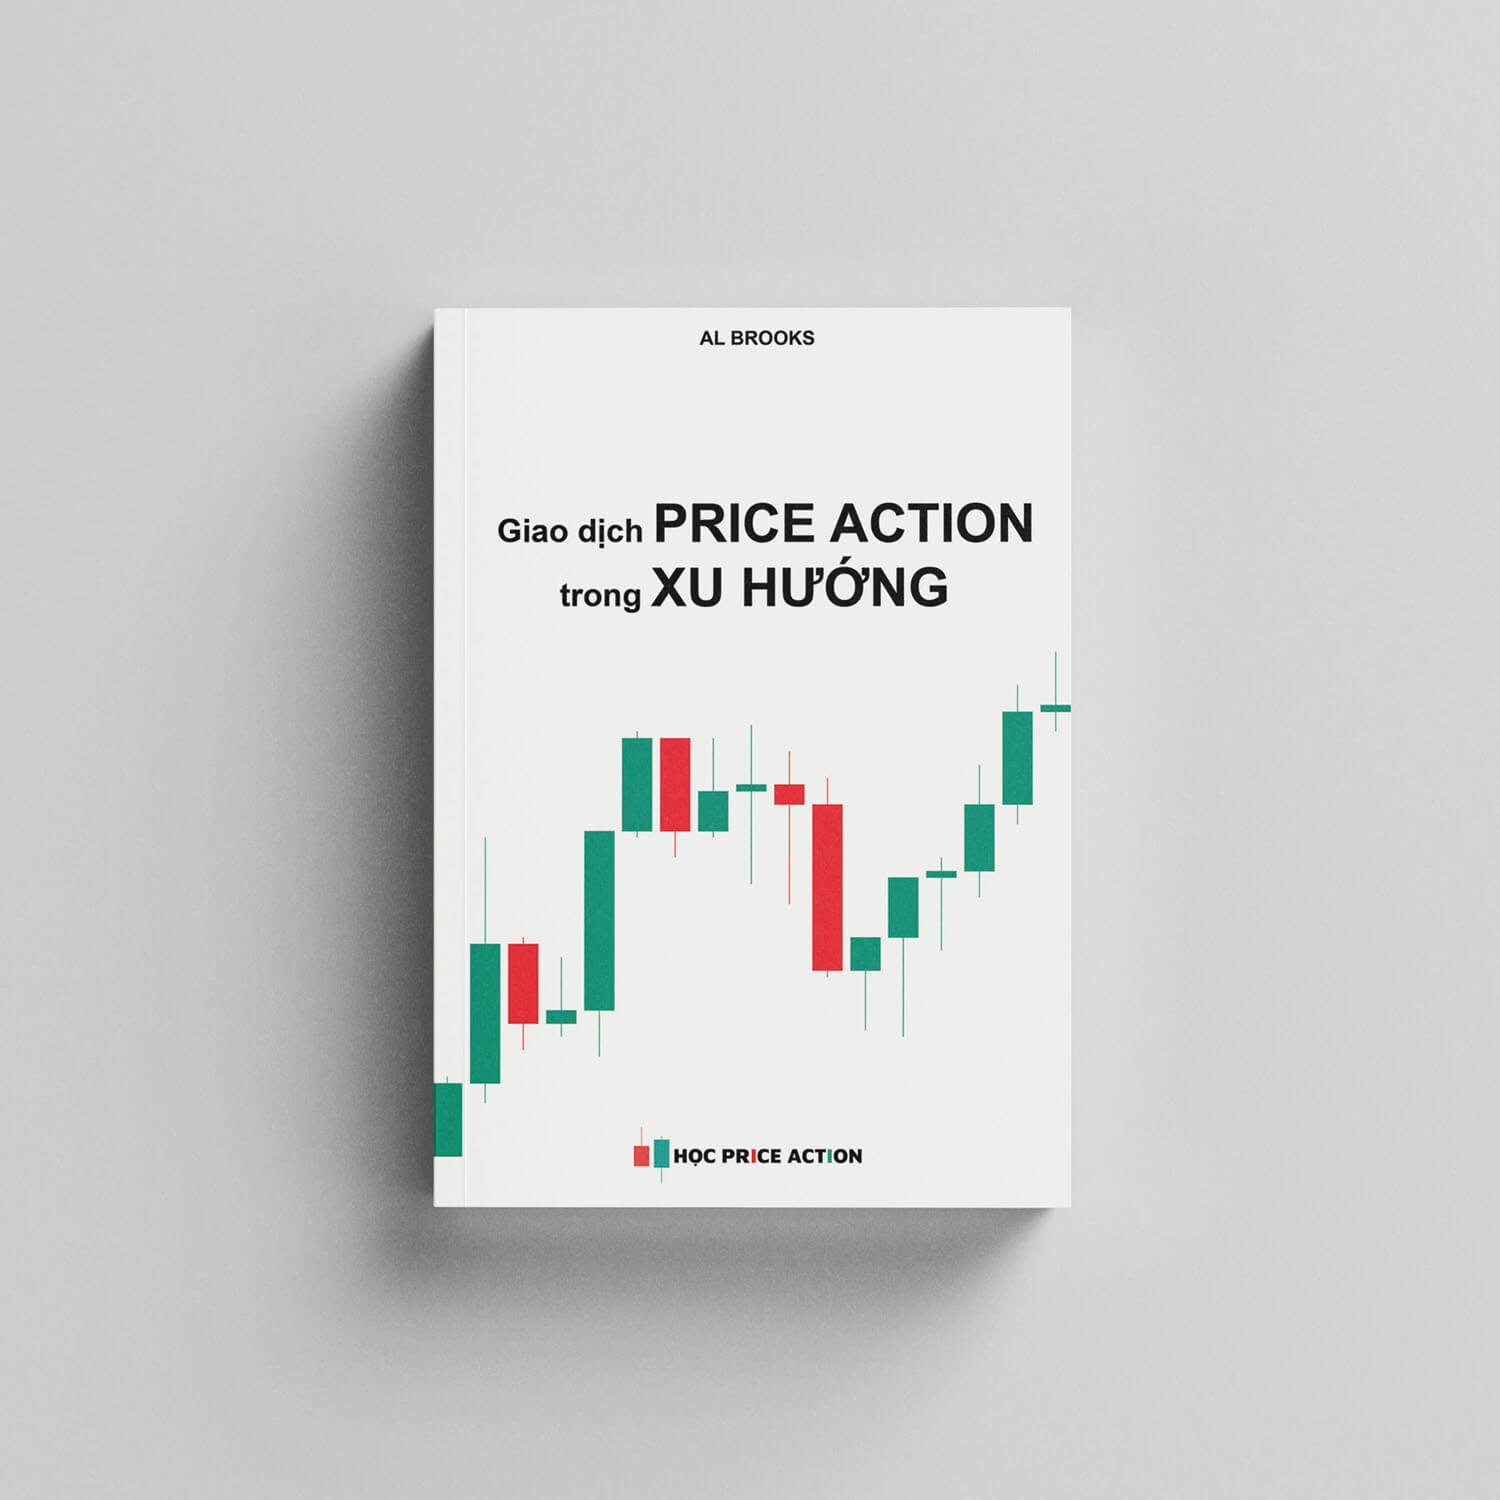 giao dịch price action theo xu hướng